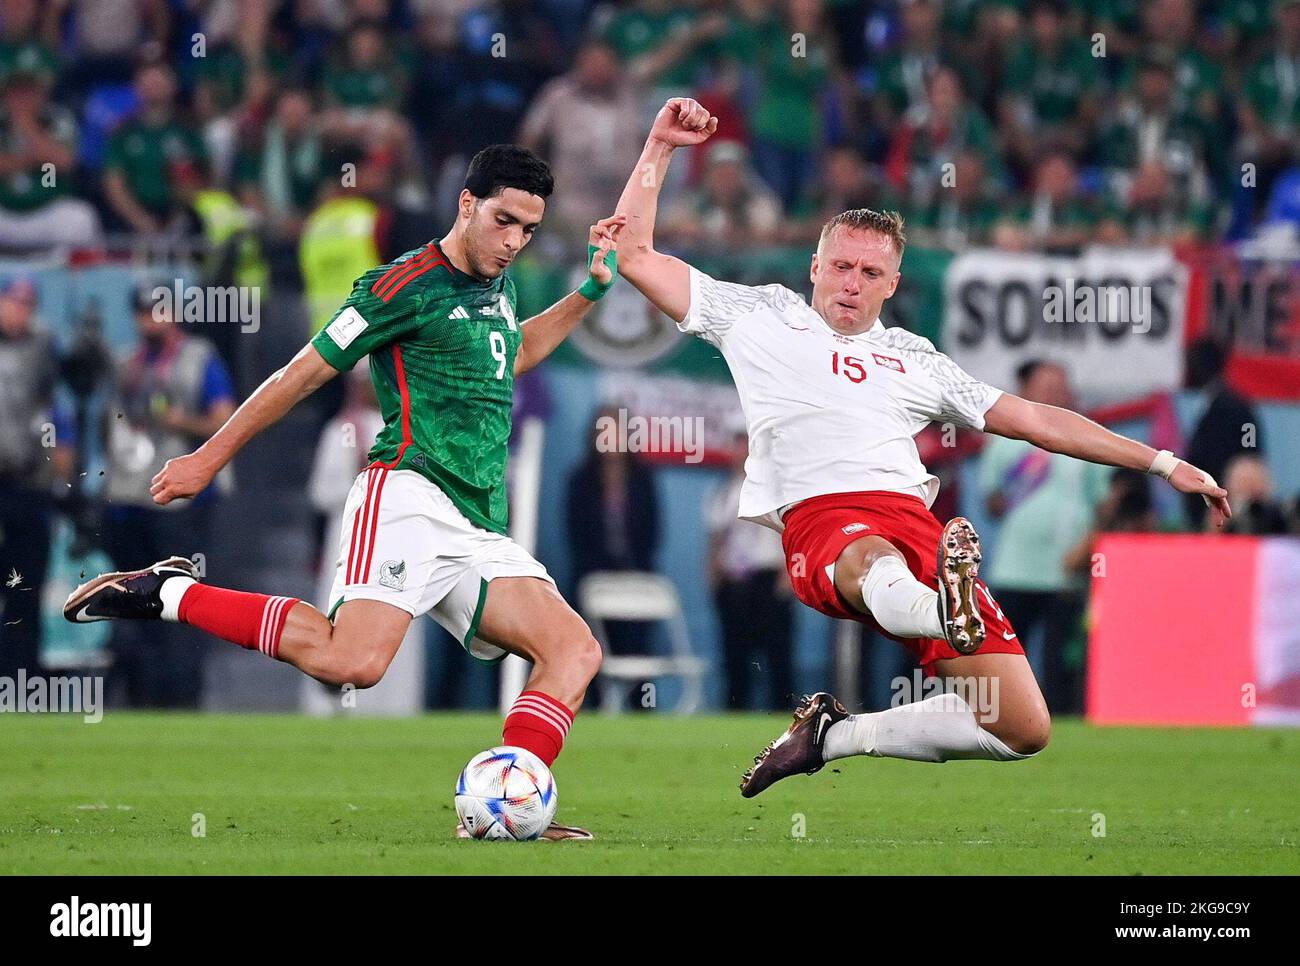 Doha, Qatar. 22nd Nov, 2022. Raul Jimenez (L) of Mexico vies with Kamil Glik of Poland the Group C match between Mexico and Poland of the 2022 FIFA World Cup at Ras Abu Aboud (974) Stadium in Doha, Qatar, Nov. 22, 2022. Credit: Chen Cheng/Xinhua/Alamy Live News Stock Photo